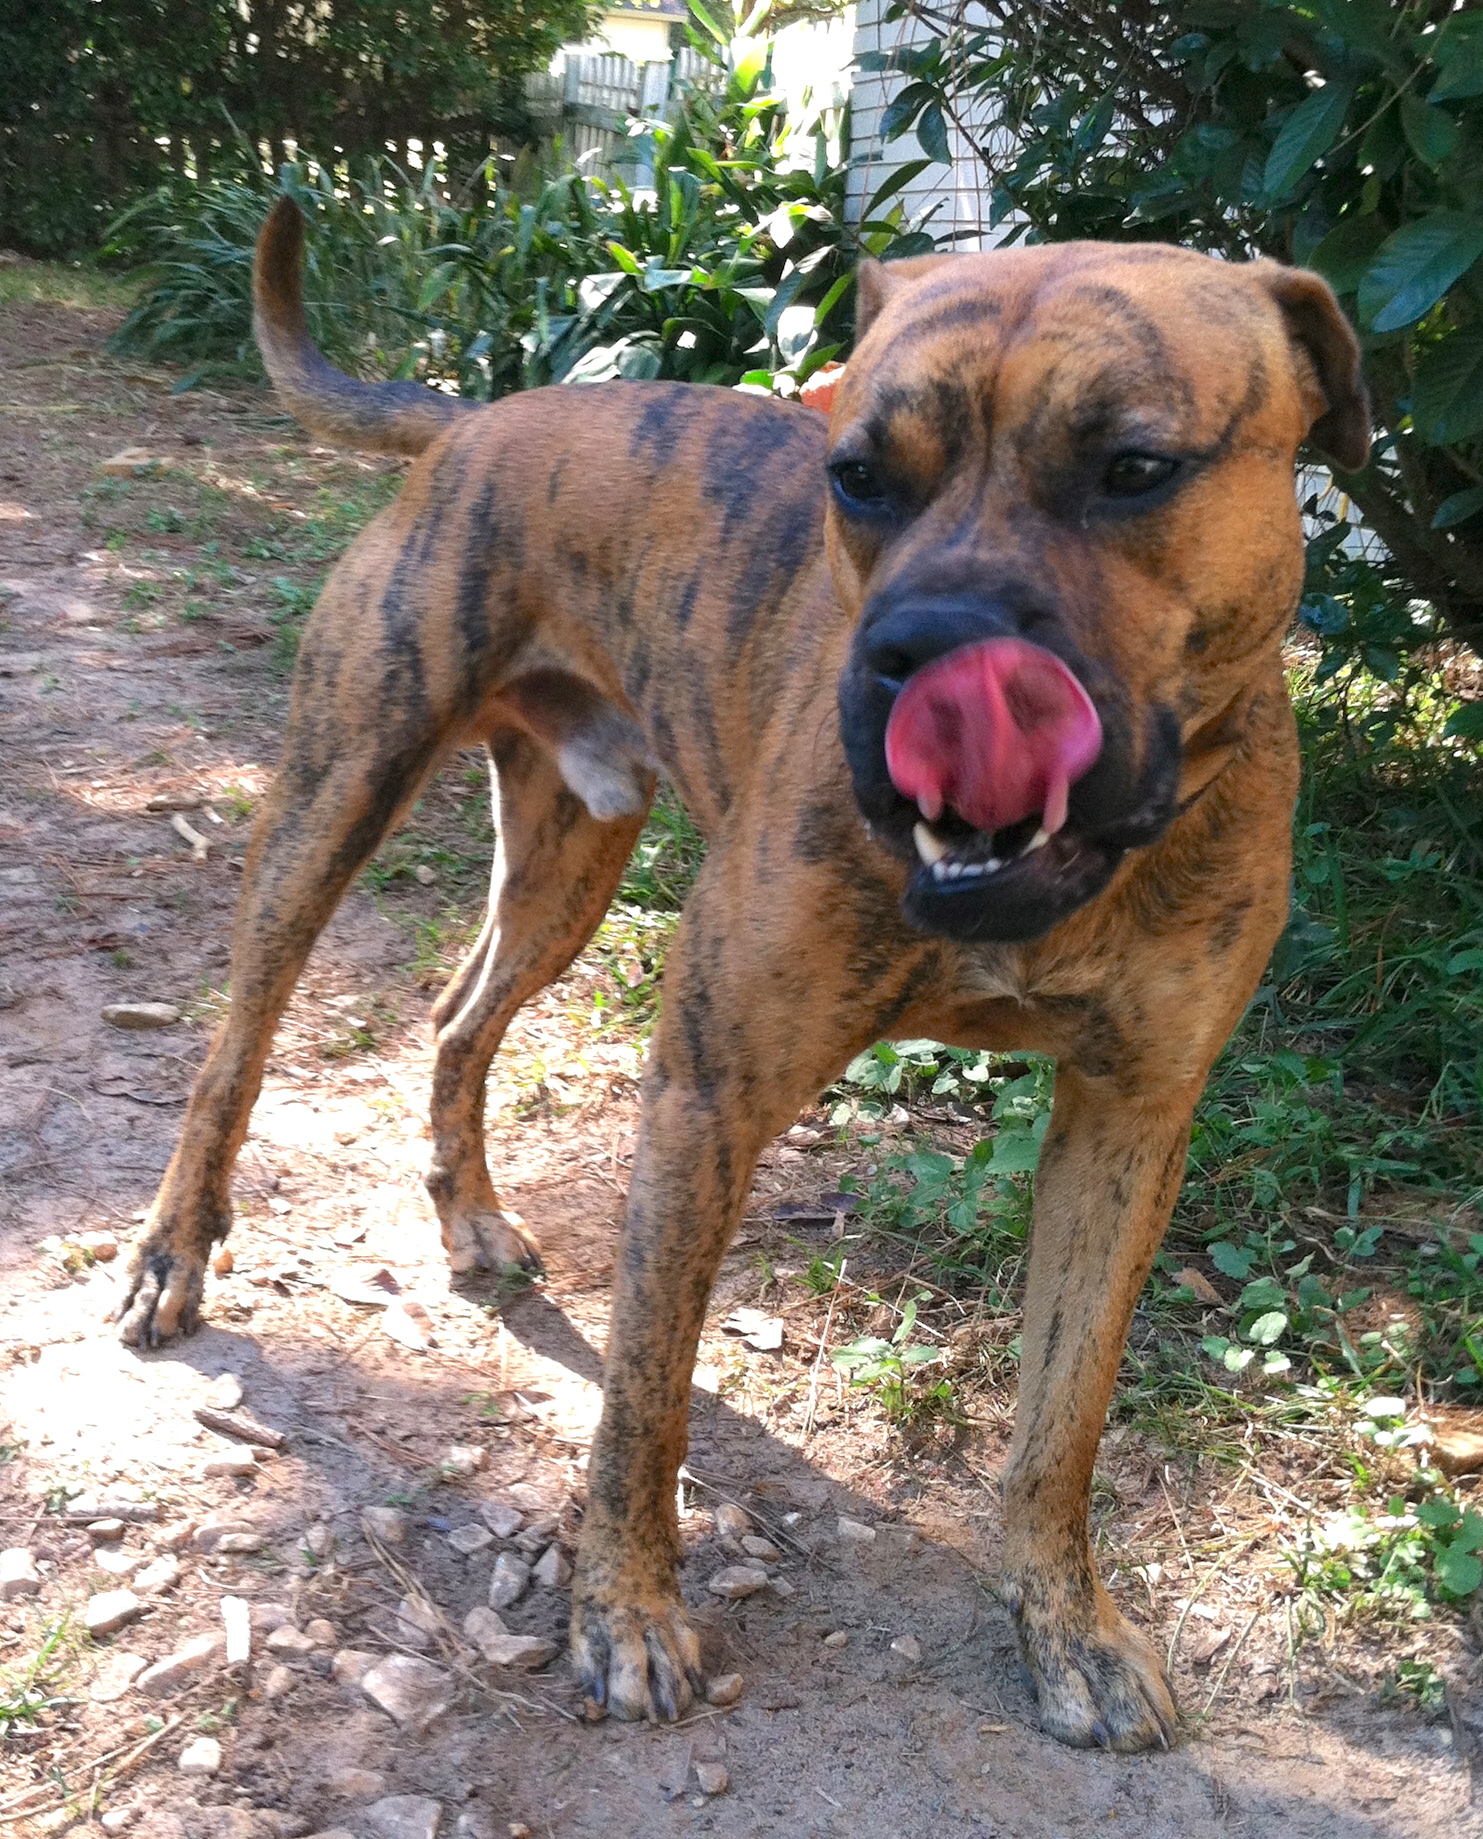 A tan brindle large dog with a long tail, rose shaped ears and a pink tongue licking this black nose.